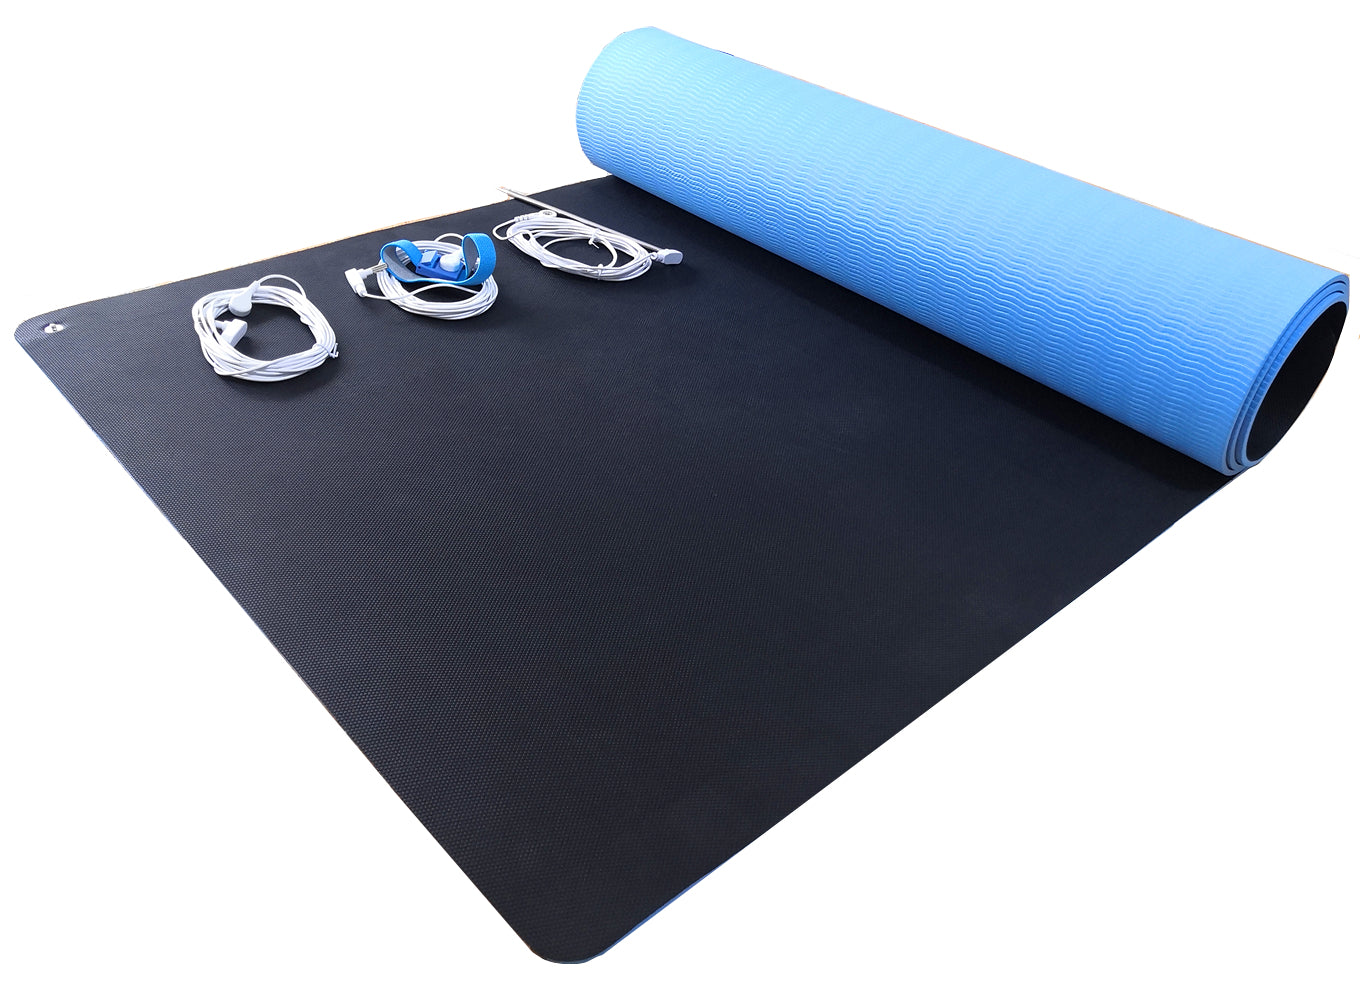 Earth Grounding Yoga/Fitness Universal Mat with Grounding Cord and Rod,Eco-Friendly TPE,Anti-Skid-Therapy, Potential EMF and ESD Protection